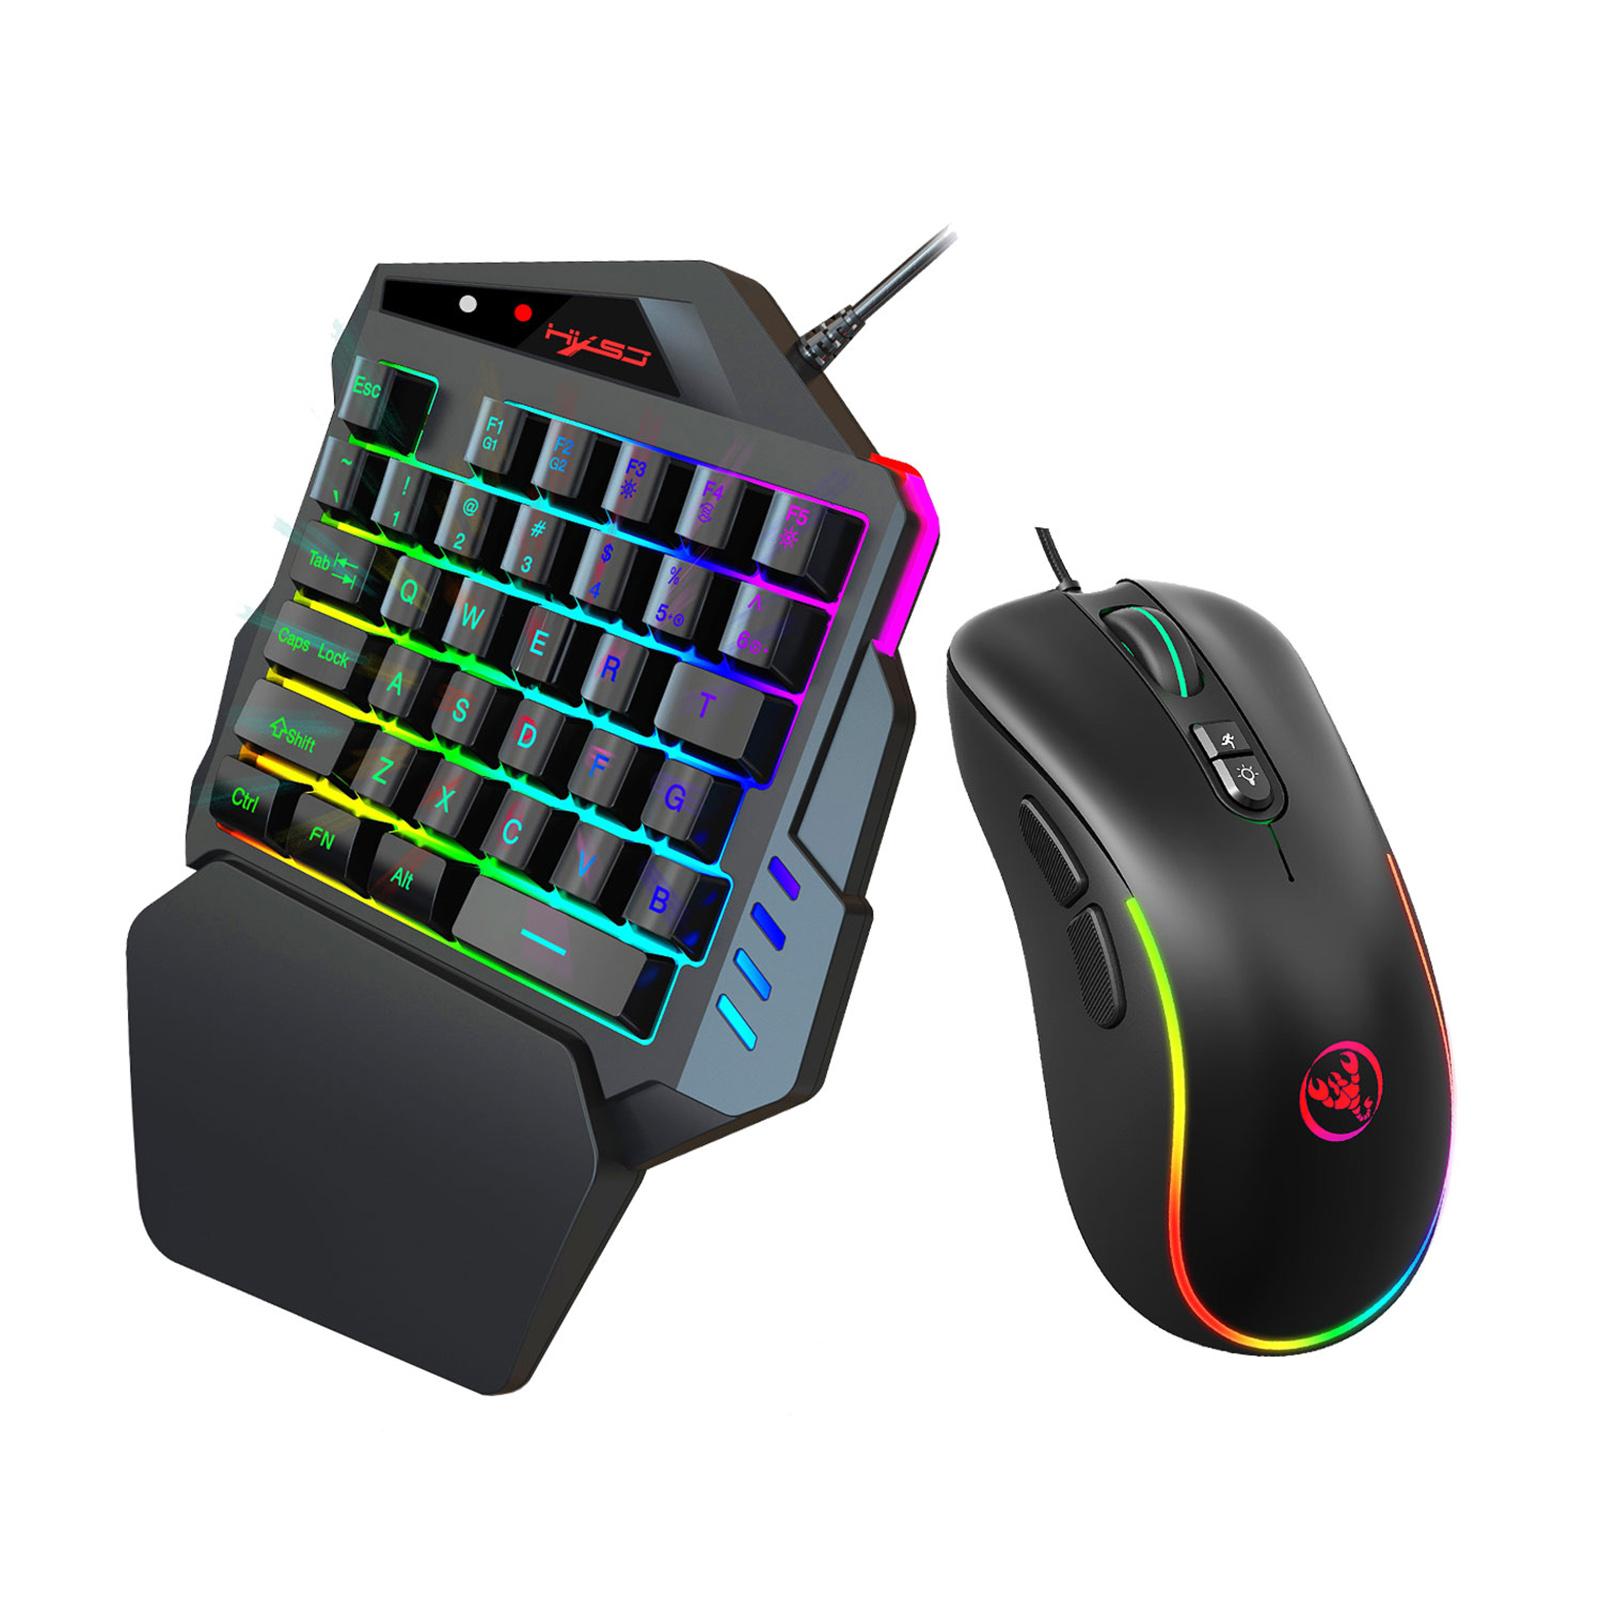 HXSJ J300+V500 Keyboard and Mouse Combo RGB Lighting Programmable Gaming Mouse+One-handed Game Keyboard